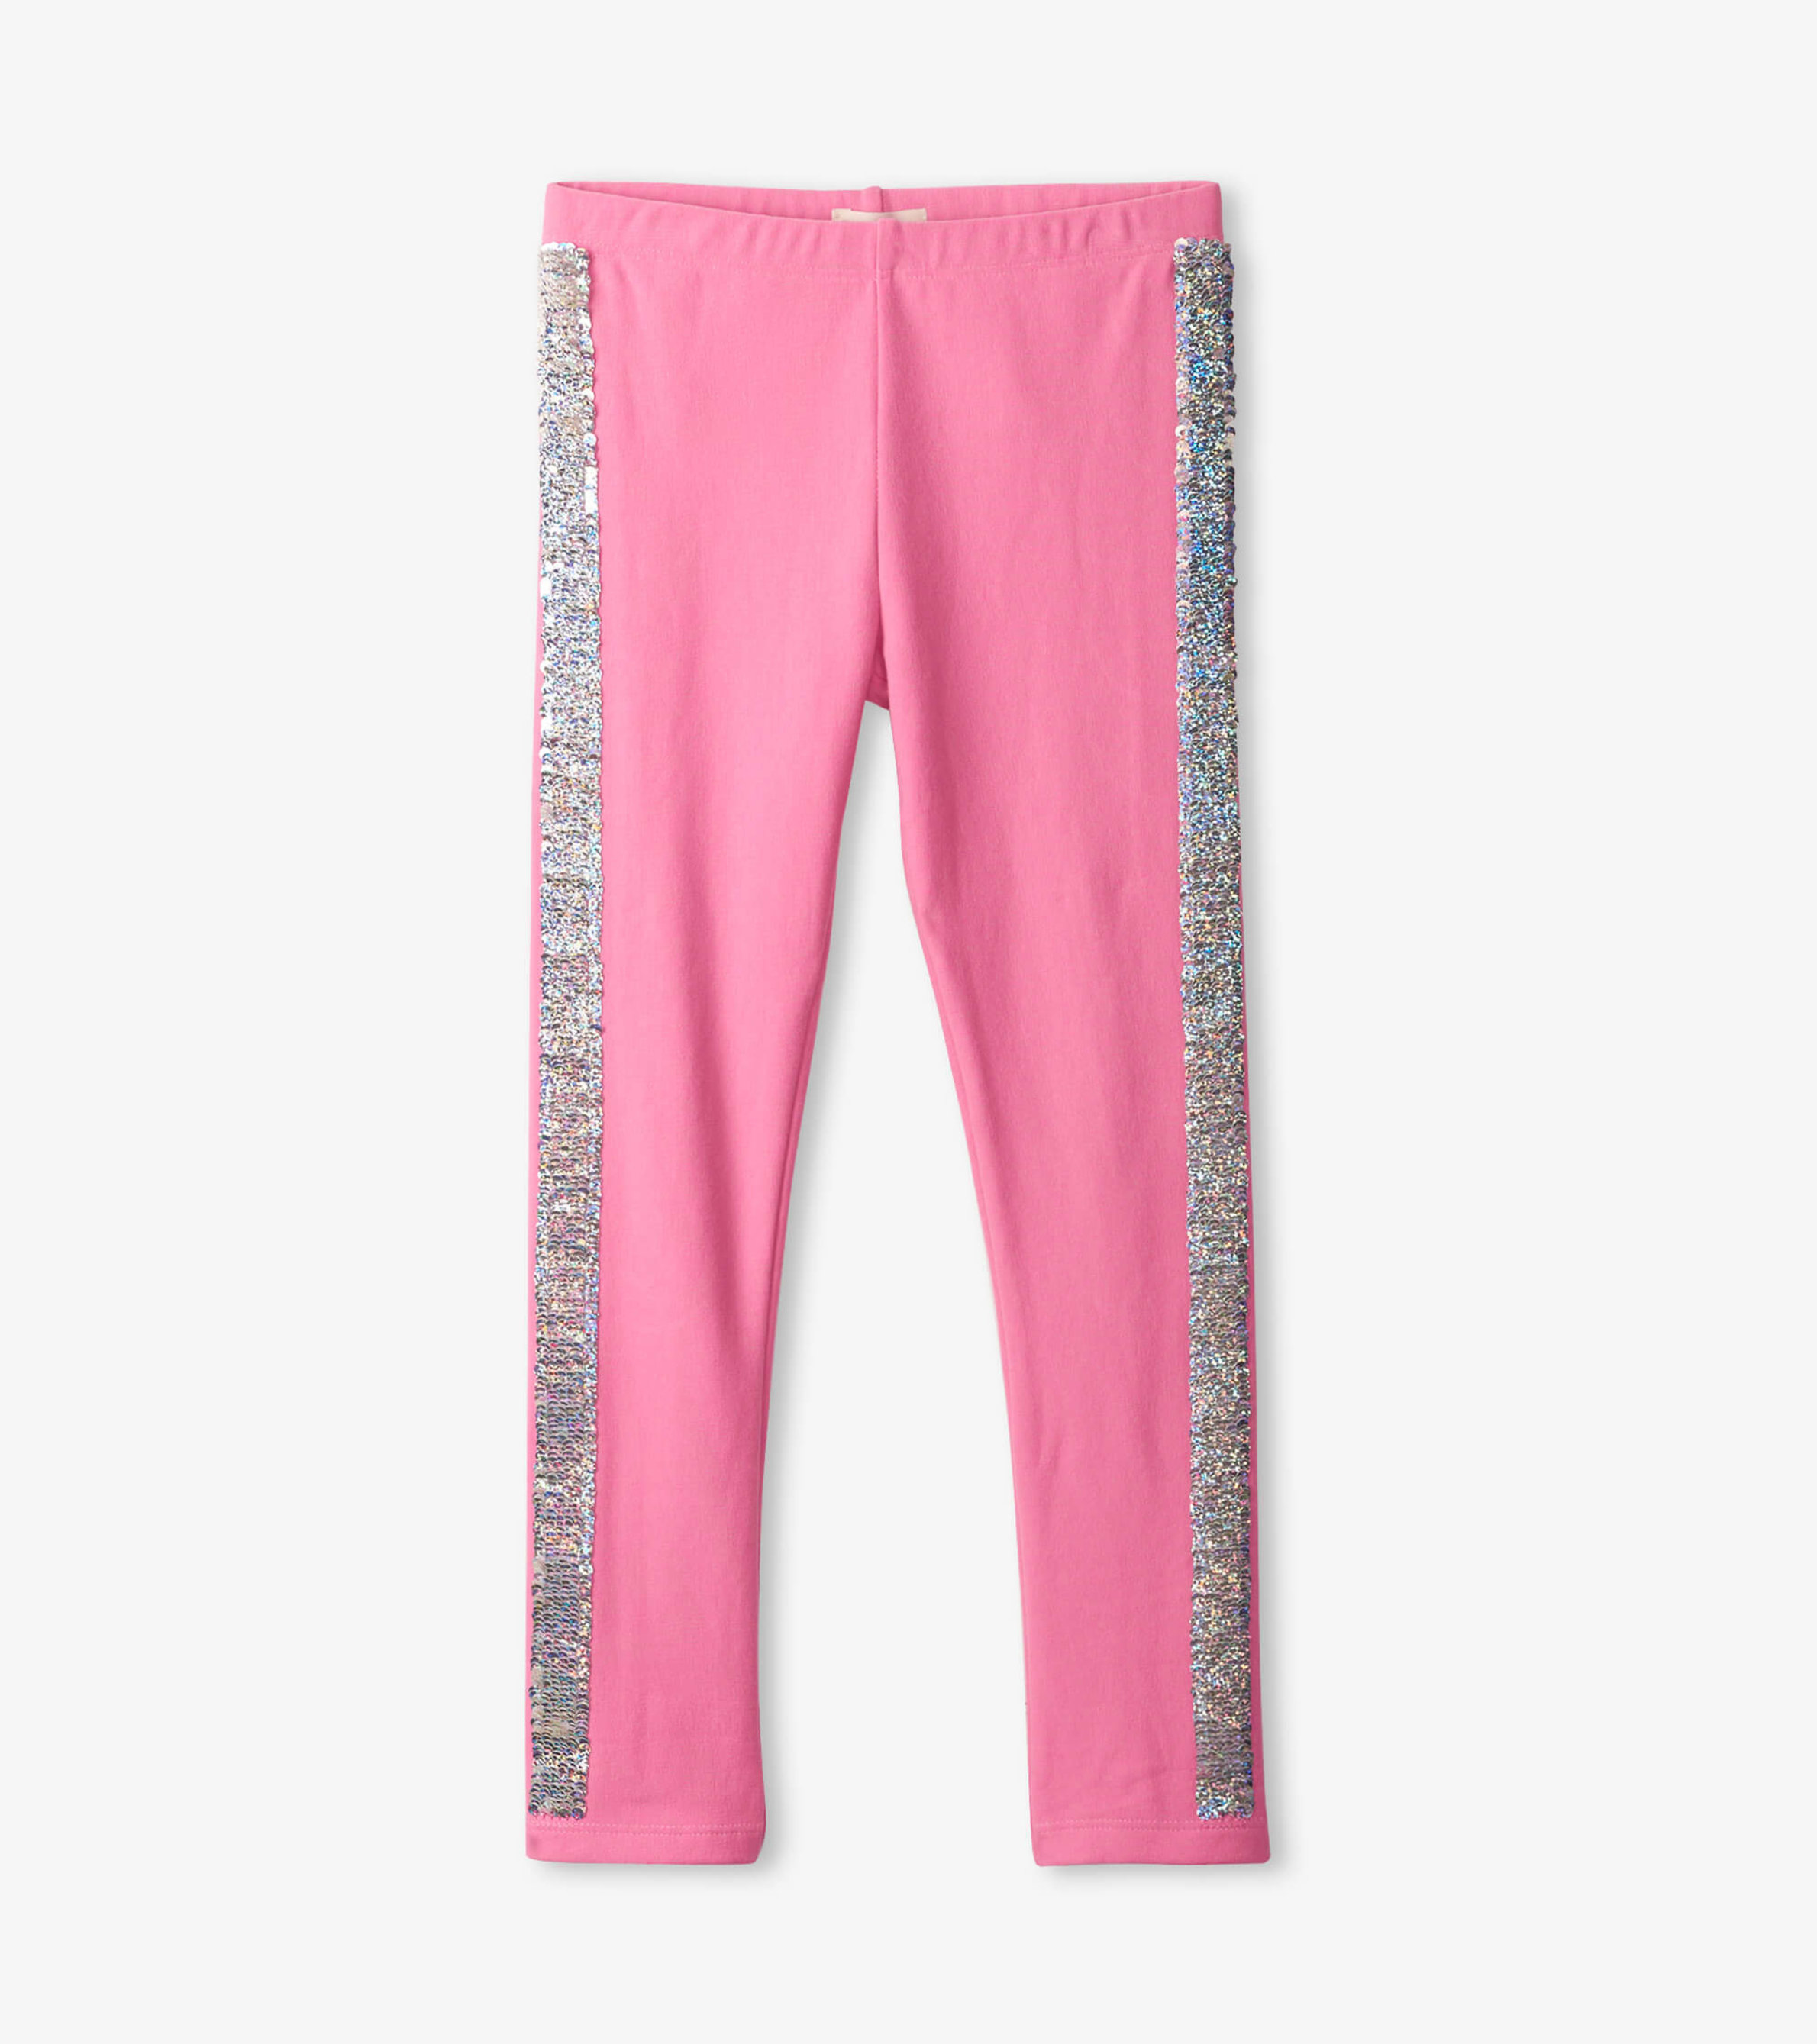 Pink Sequin Leggings Kids Cheapest Offers